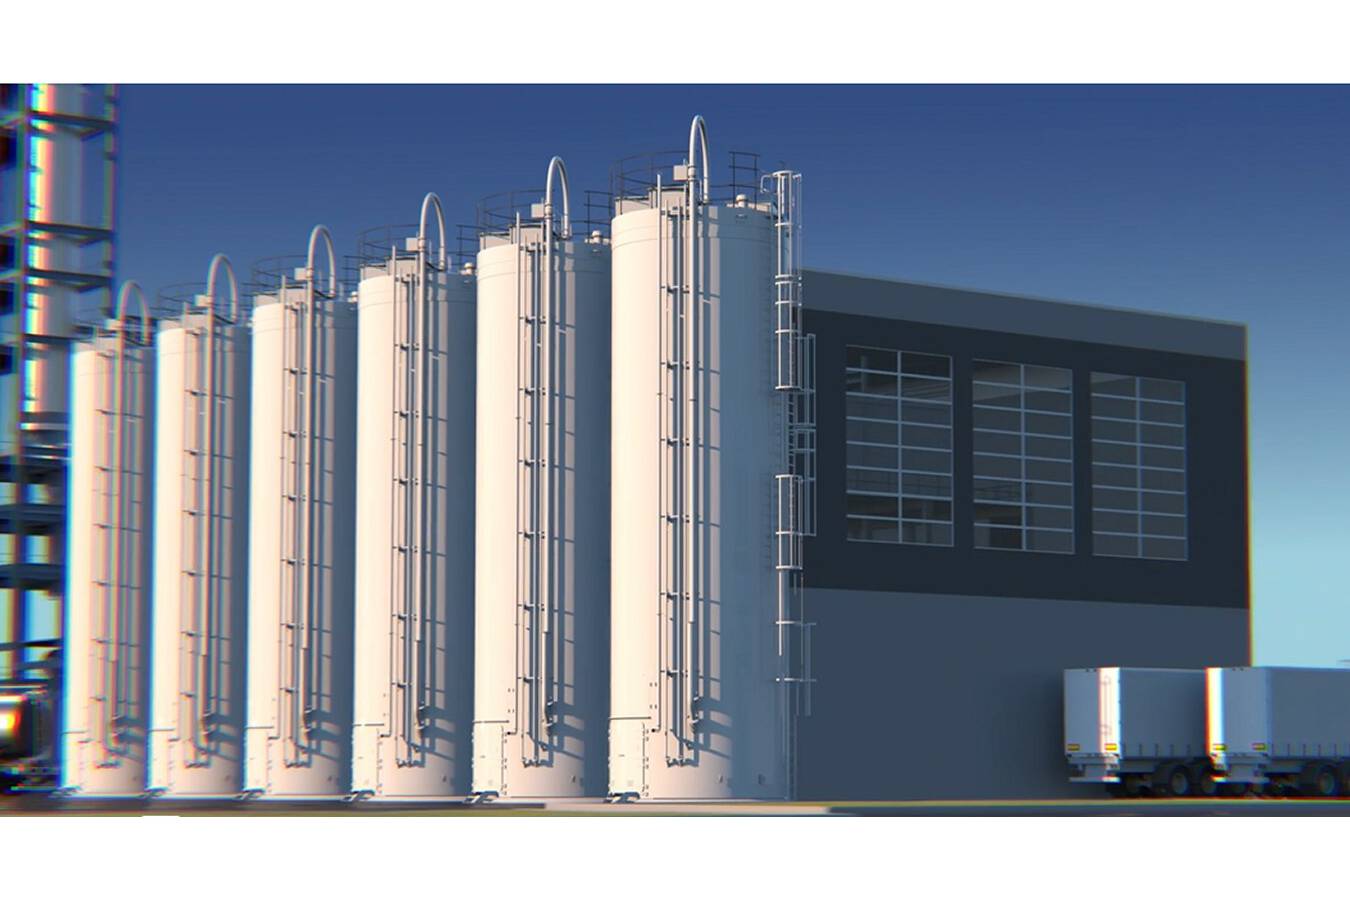 Polem developed to become European market leader Watch the video. Polem is now regarded both nationally and internationally as the top producer of composite silos and tanks.